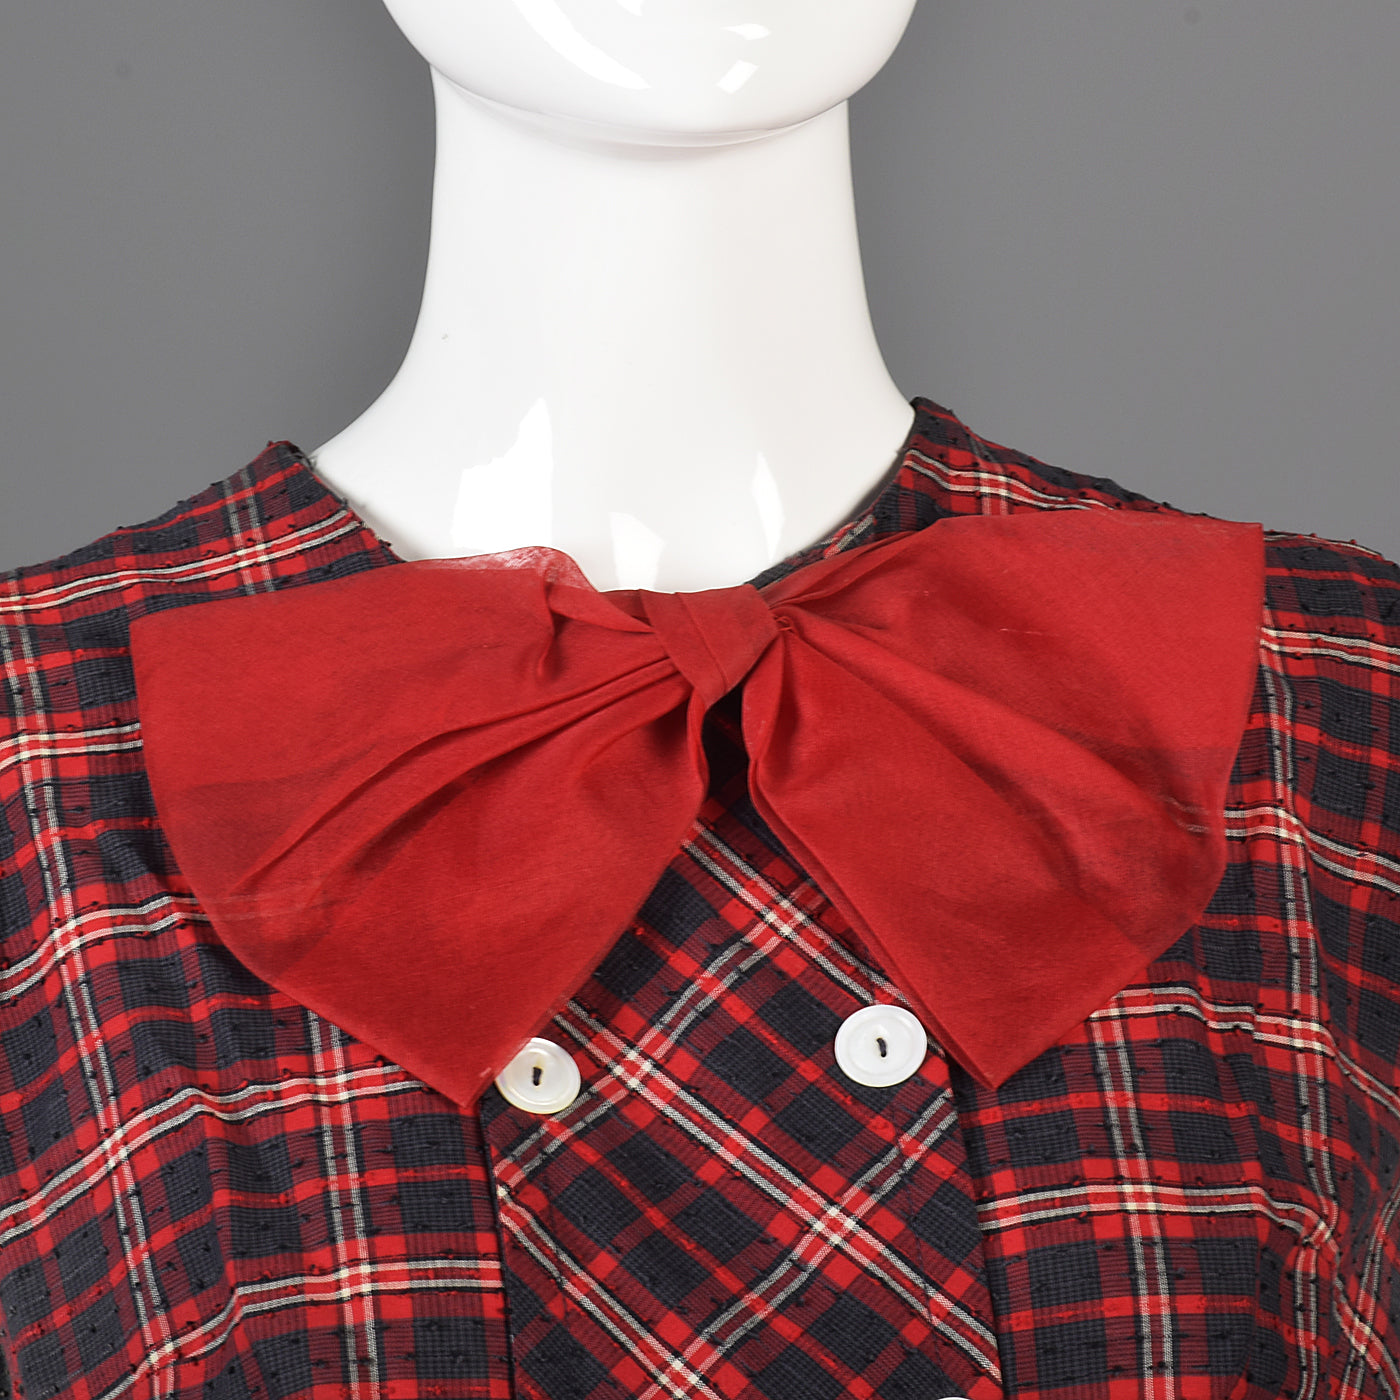 1950s Red Plaid Party Dress with Red Bow